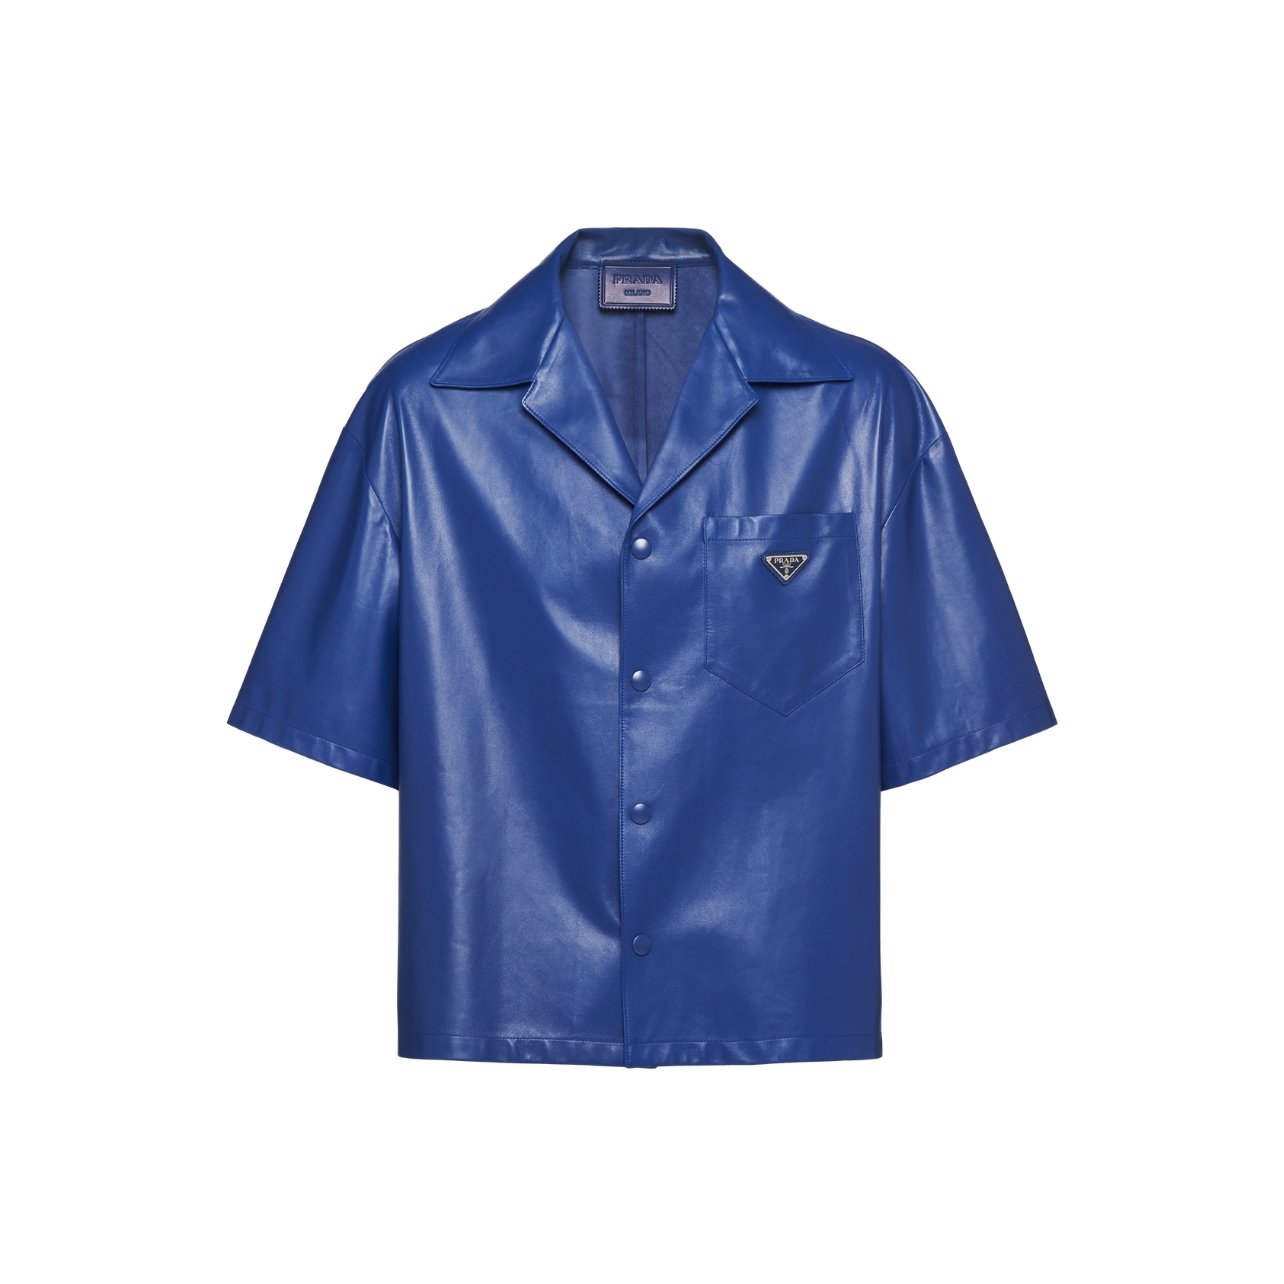 Blue leather shirt with front snap closure and signature Prada logo on the front left pocket